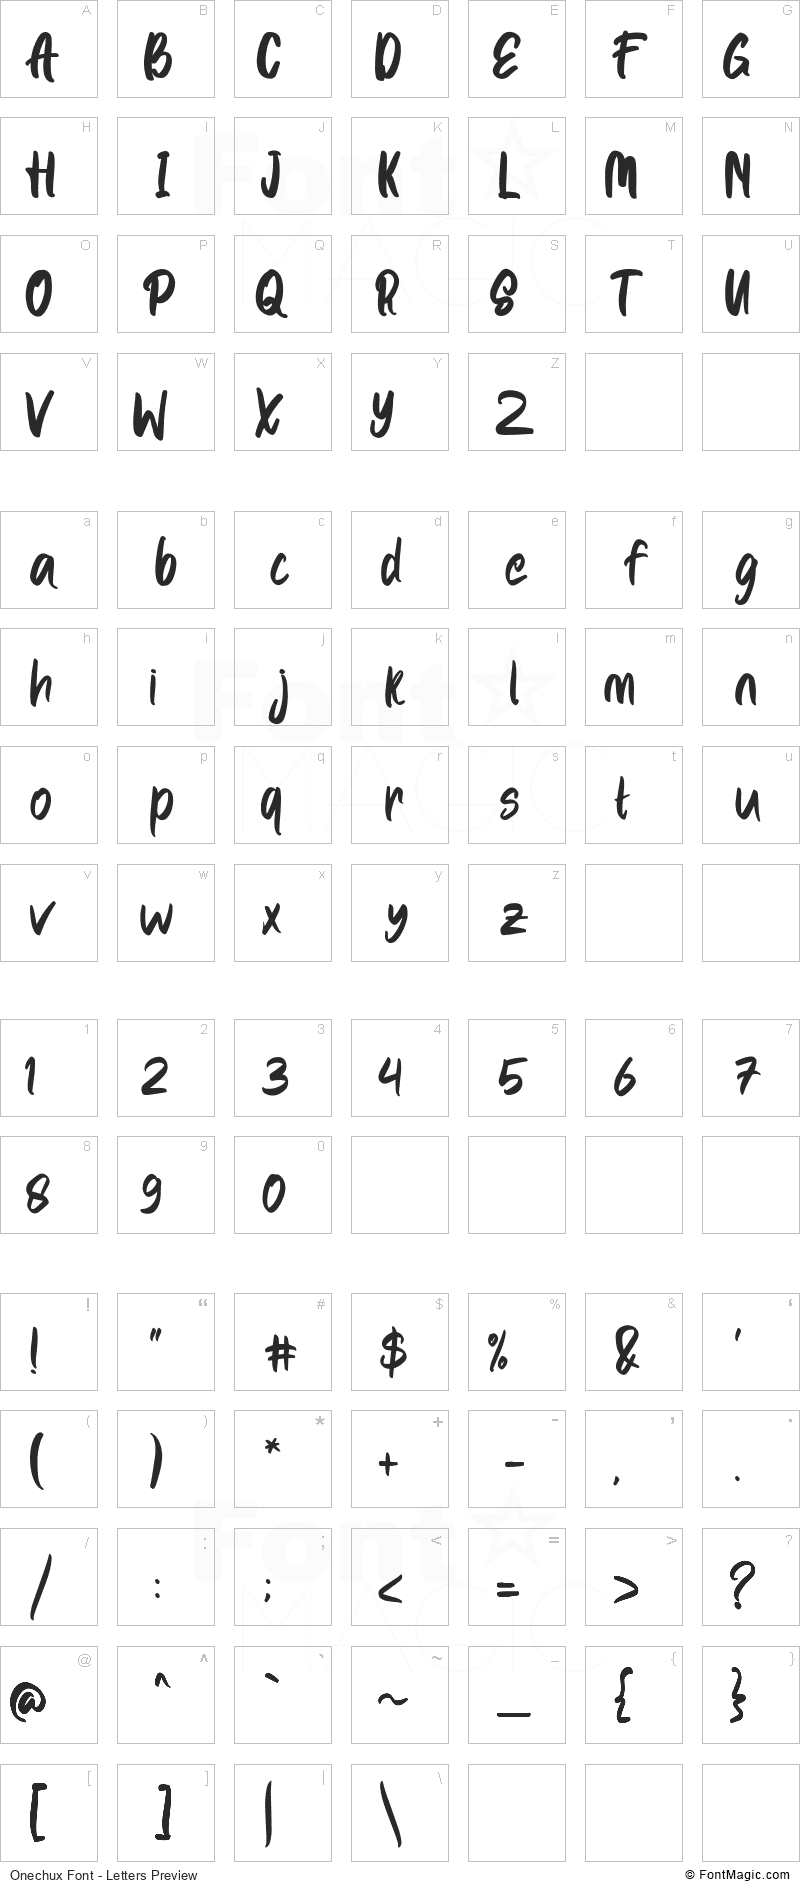 Onechux Font - All Latters Preview Chart